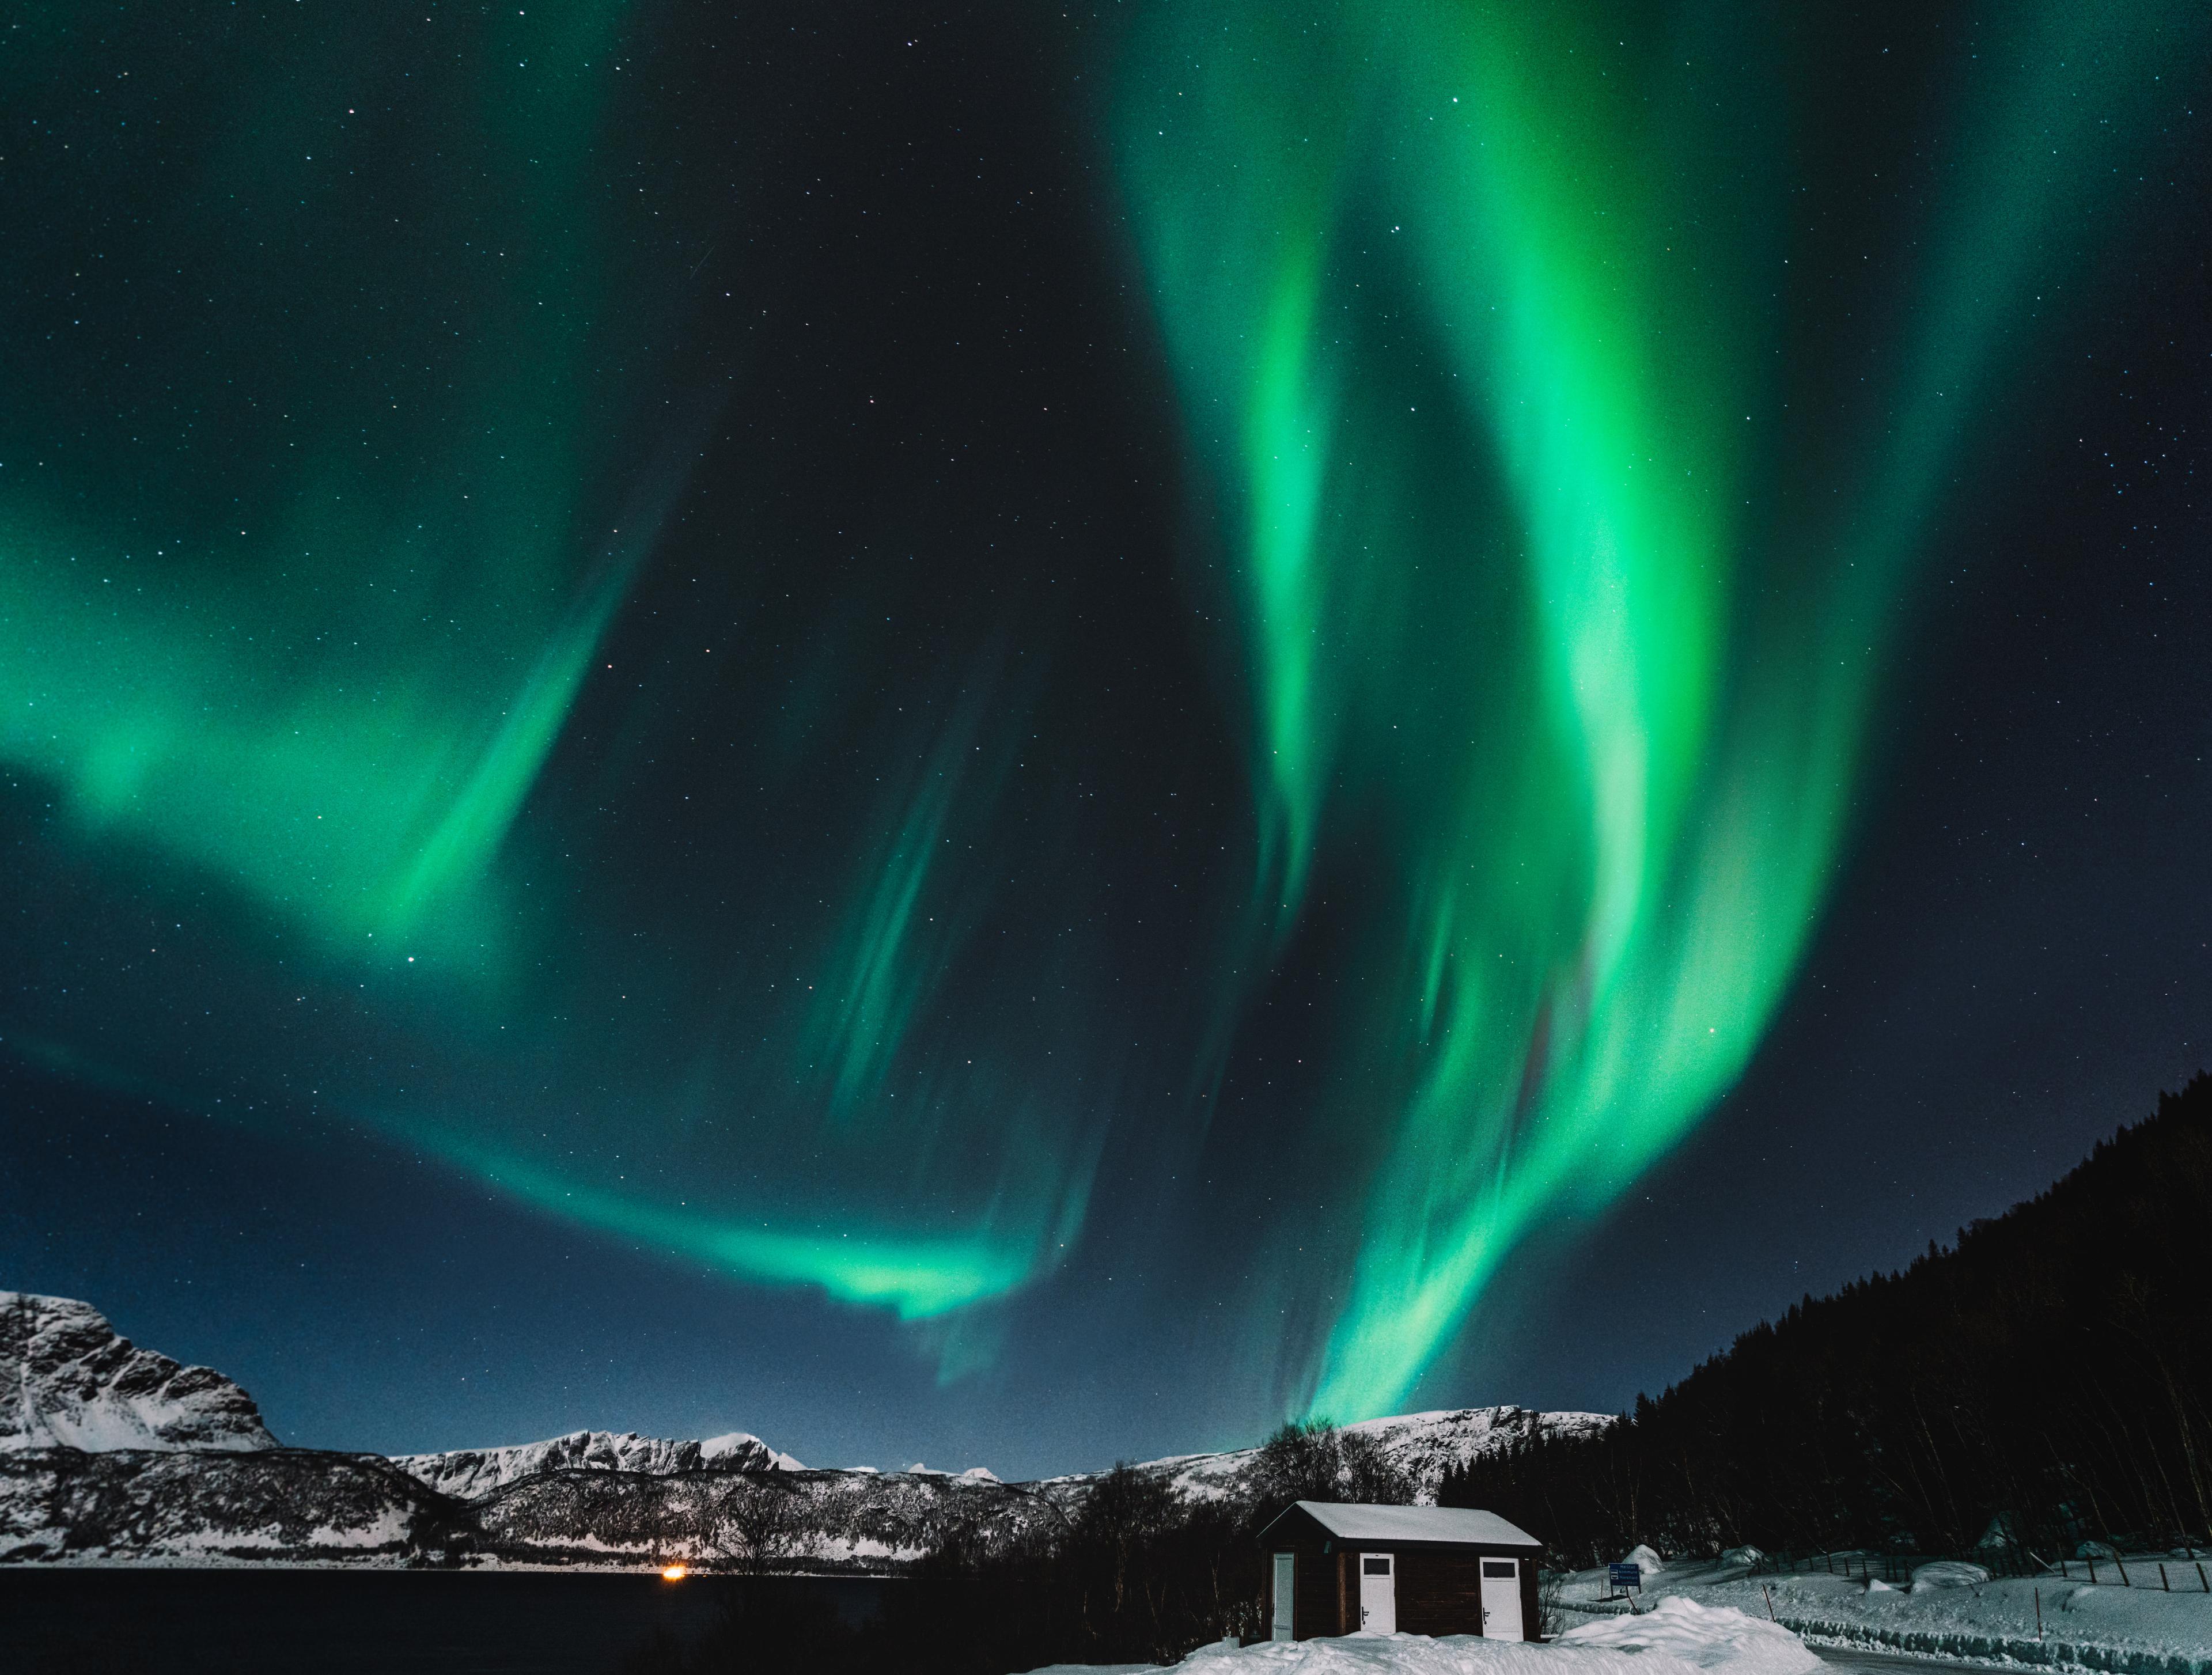 The Northern Lights sweep across the sky above a small cabin in a snowy landscape.